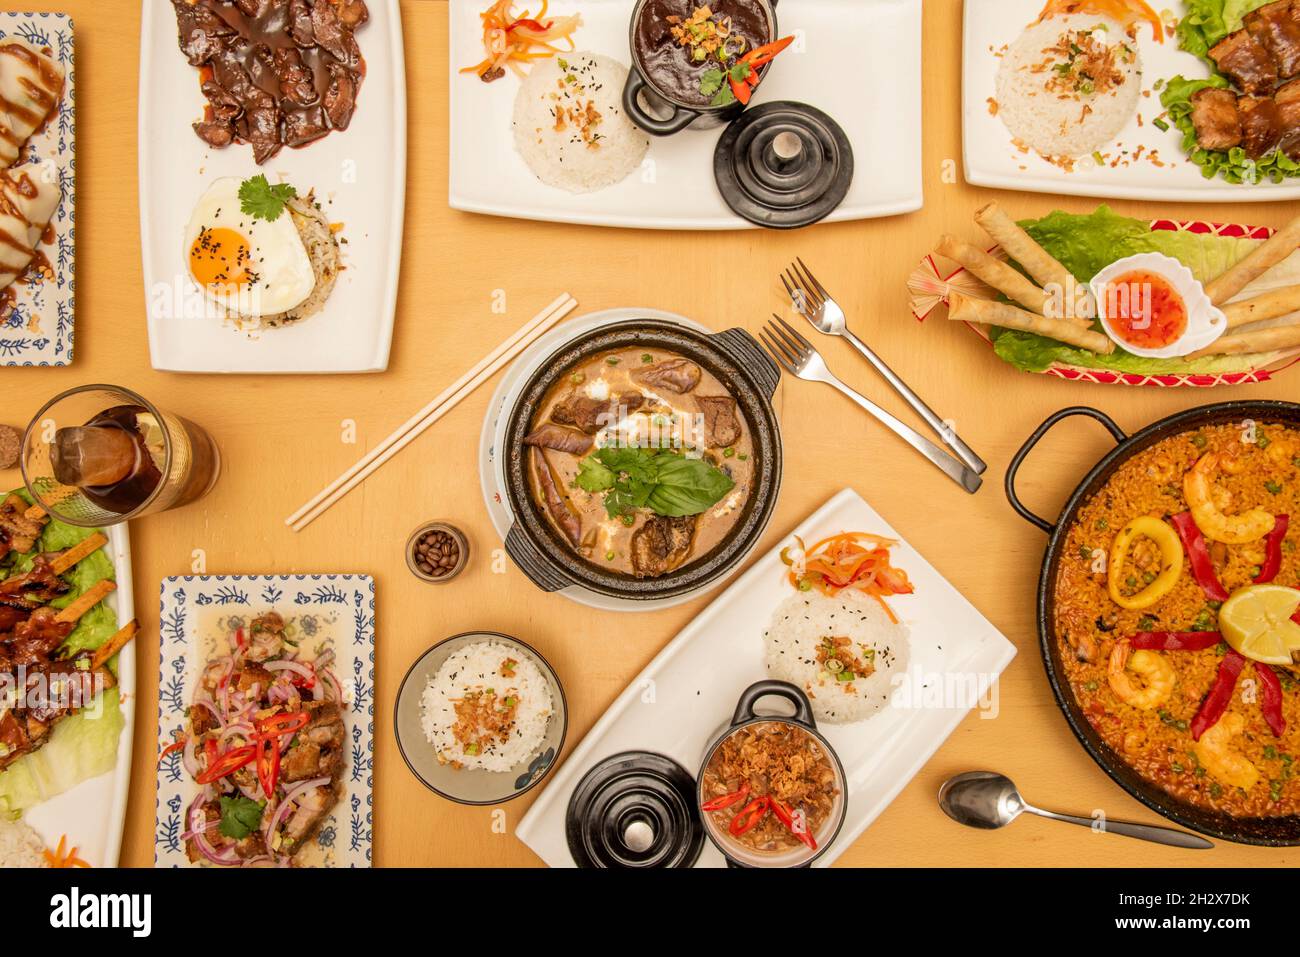 Top view image of Philippine food recipes and paella with pork stews and white rice, seafood and fried eggs Stock Photo